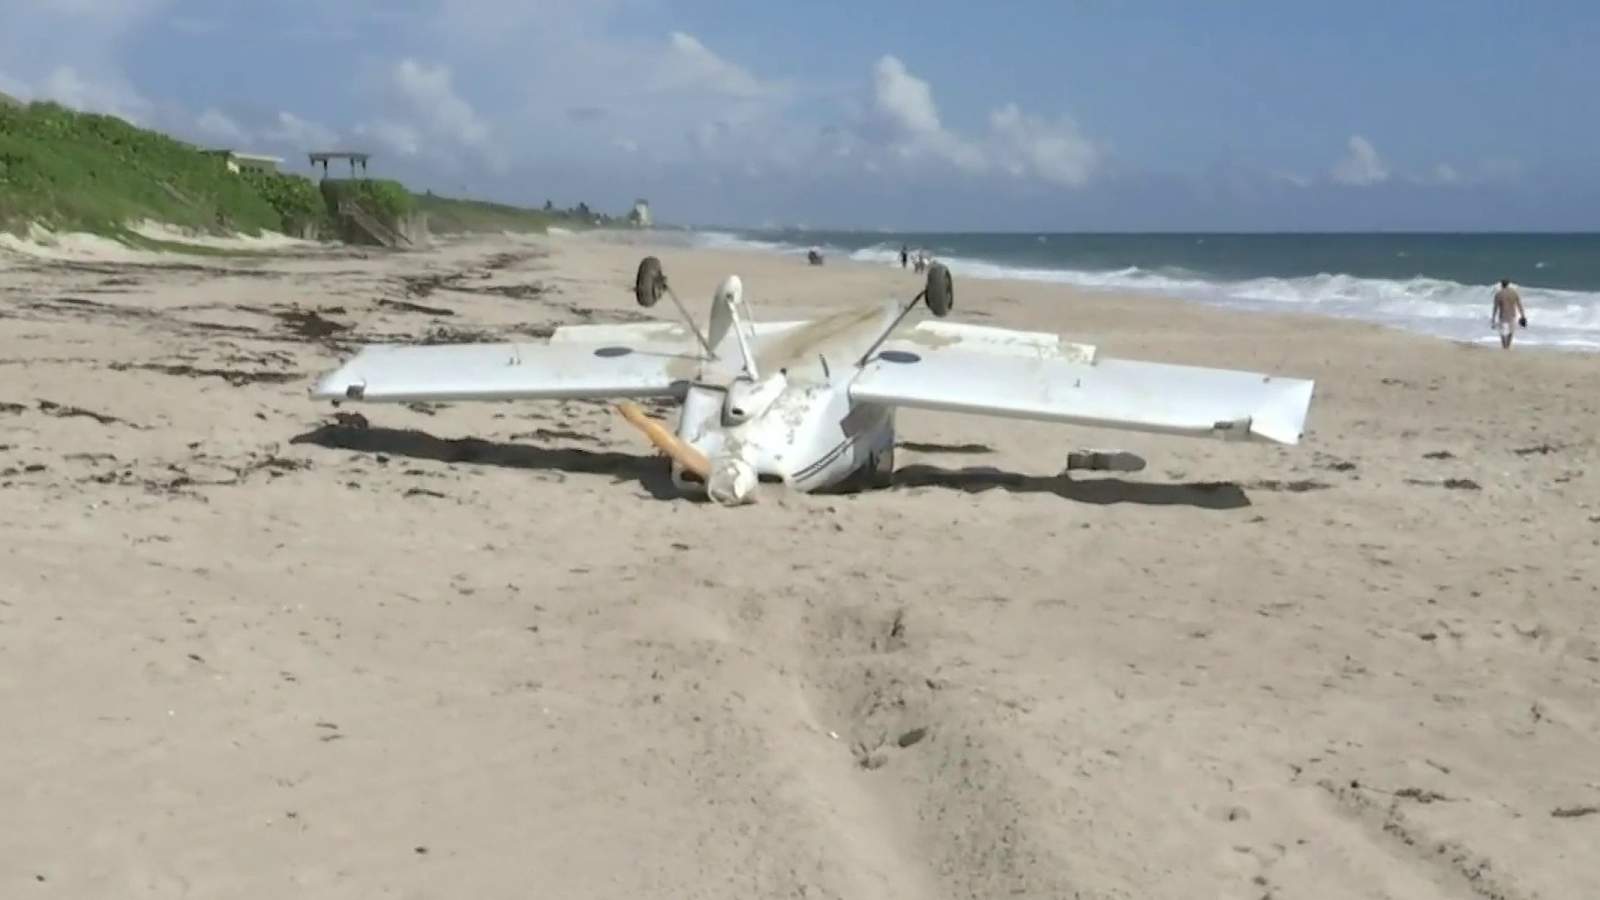 Experimental plane crashes on Melbourne Beach, injuring 1